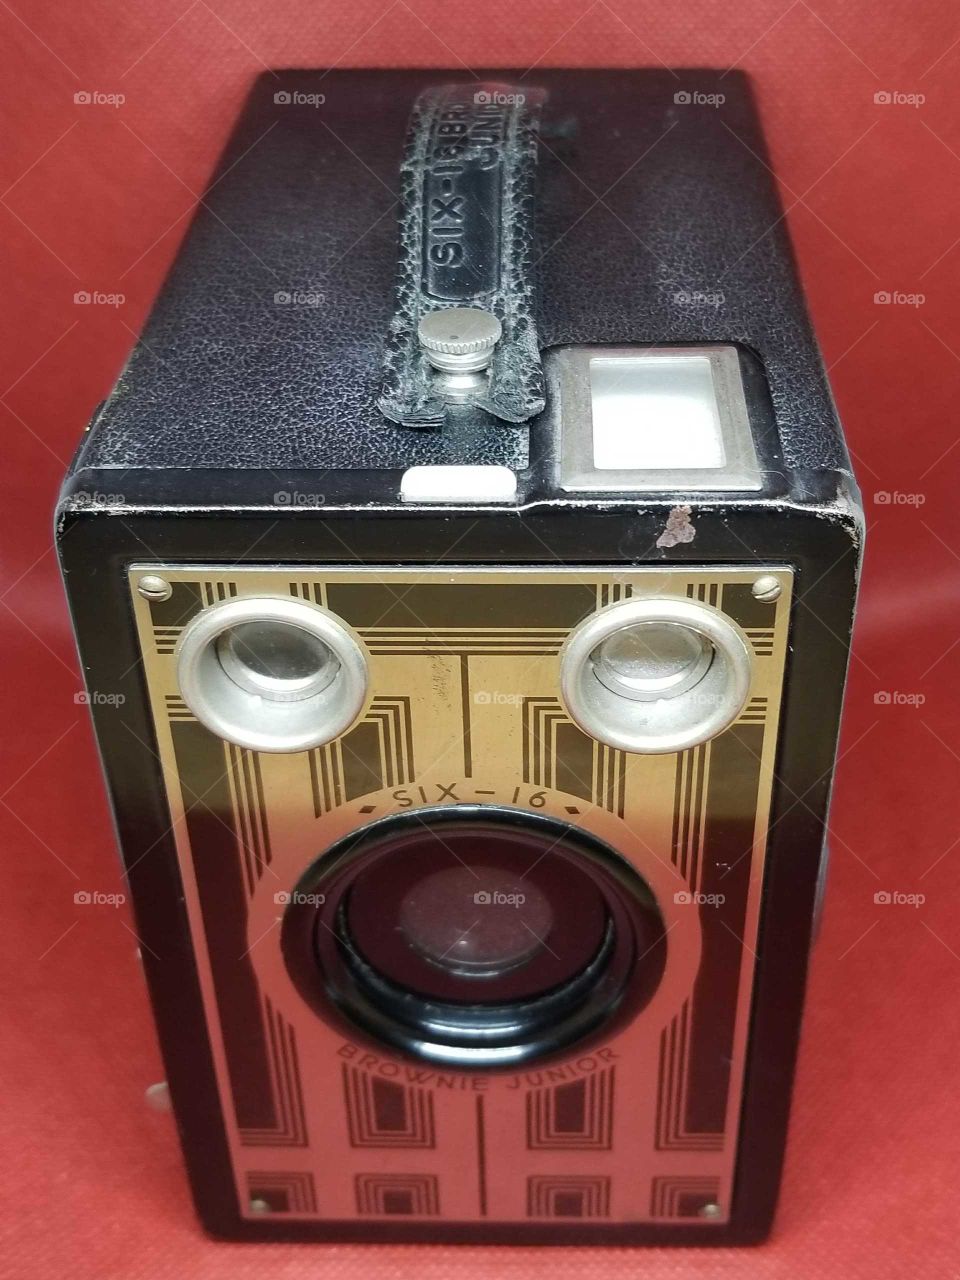 Kodak Brownie 616 from 1930's box style portrait camera with gold and black front.  Has art deco look. On red background.